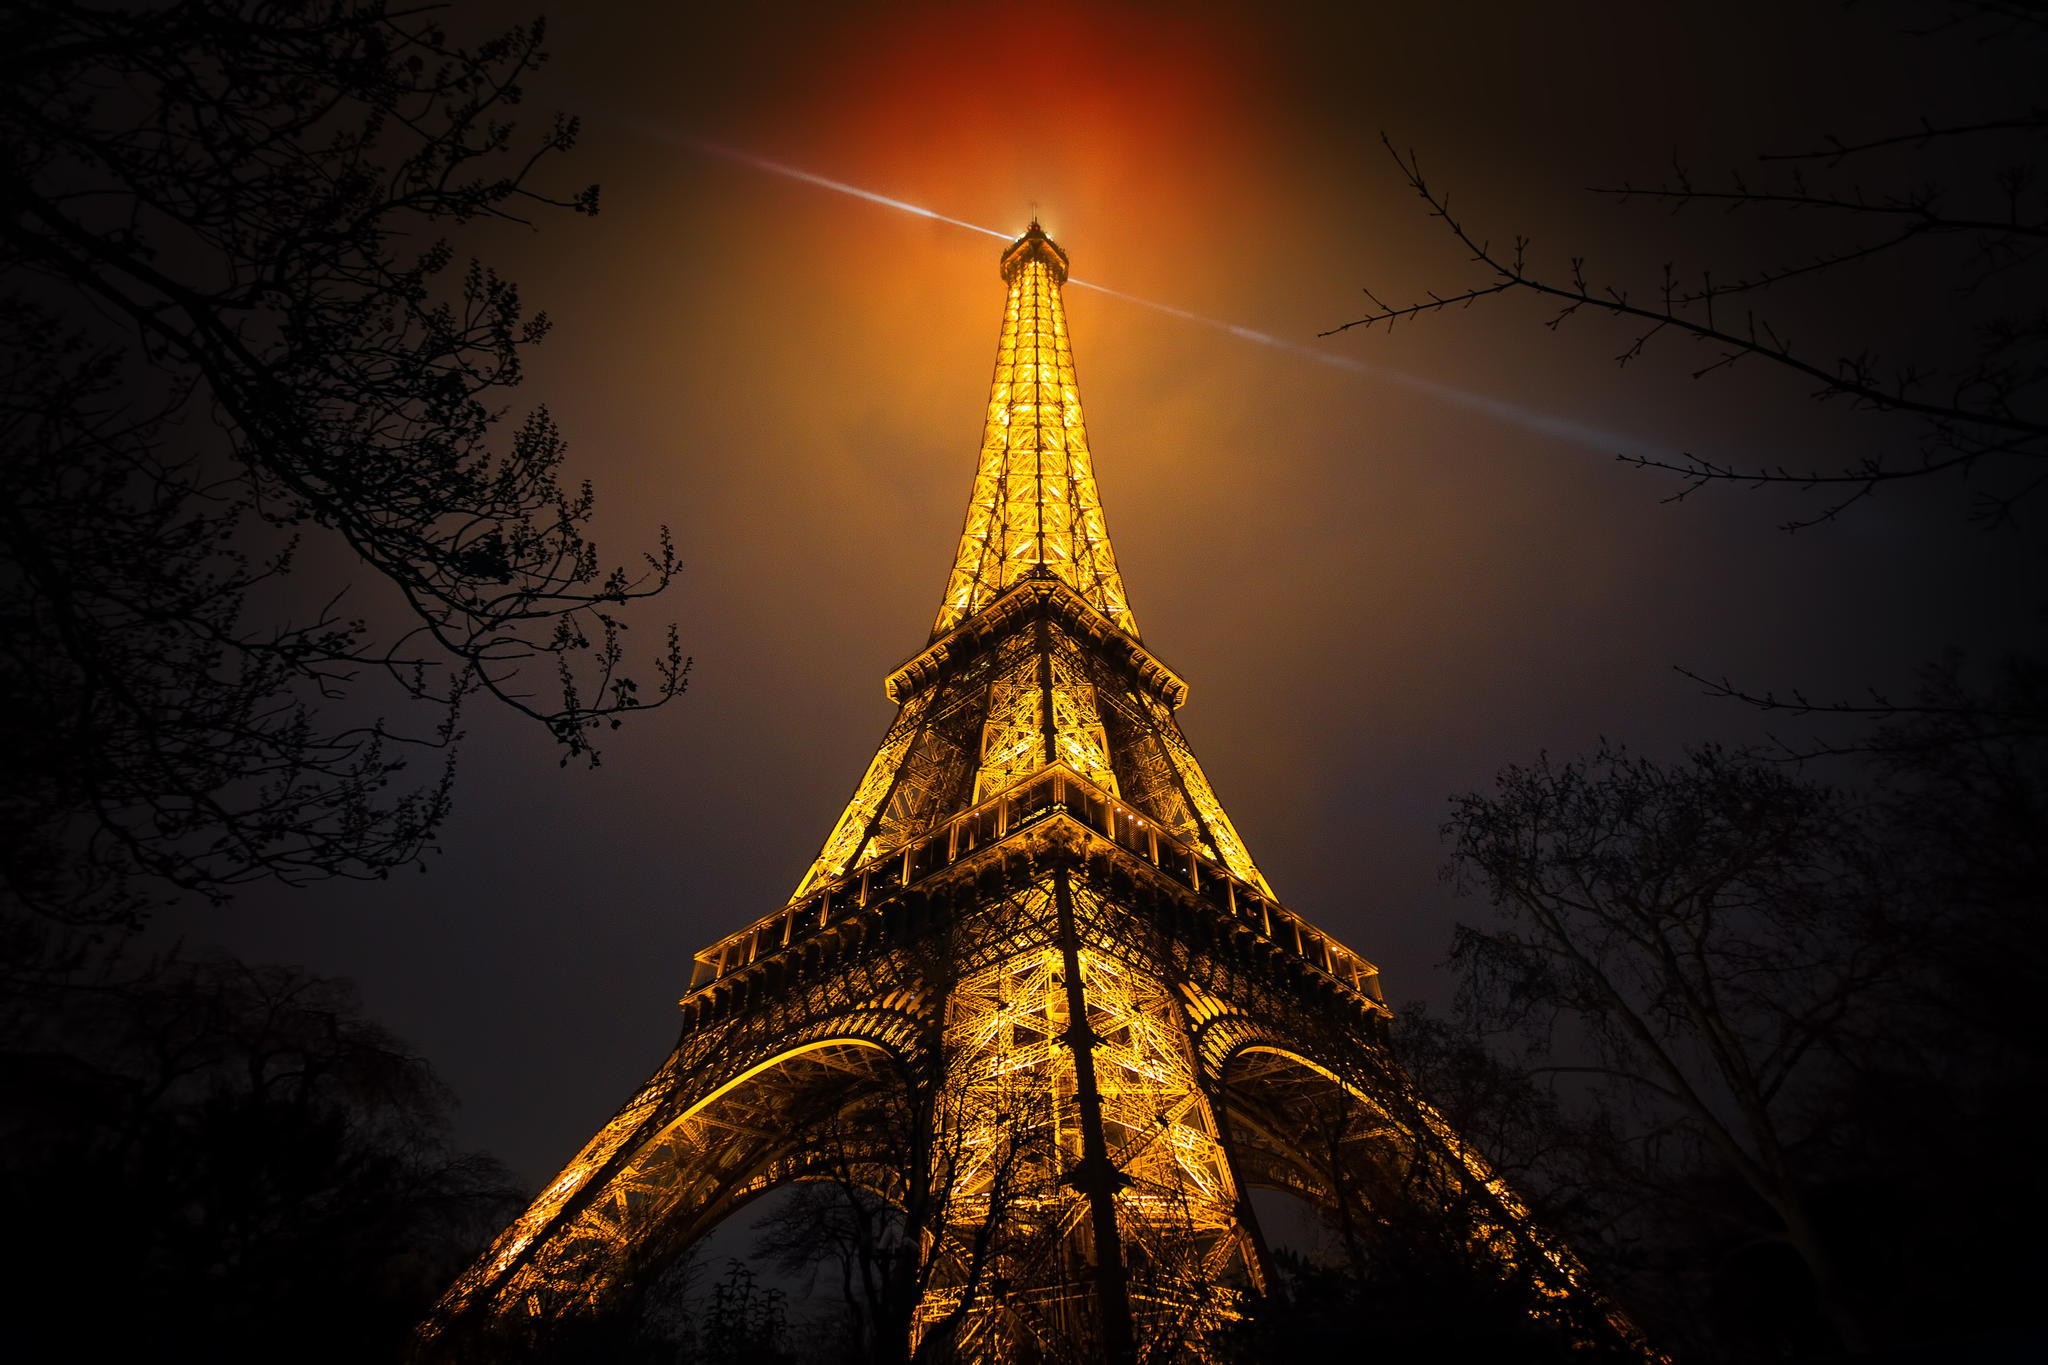 240+ Eiffel Tower HD Wallpapers and Backgrounds